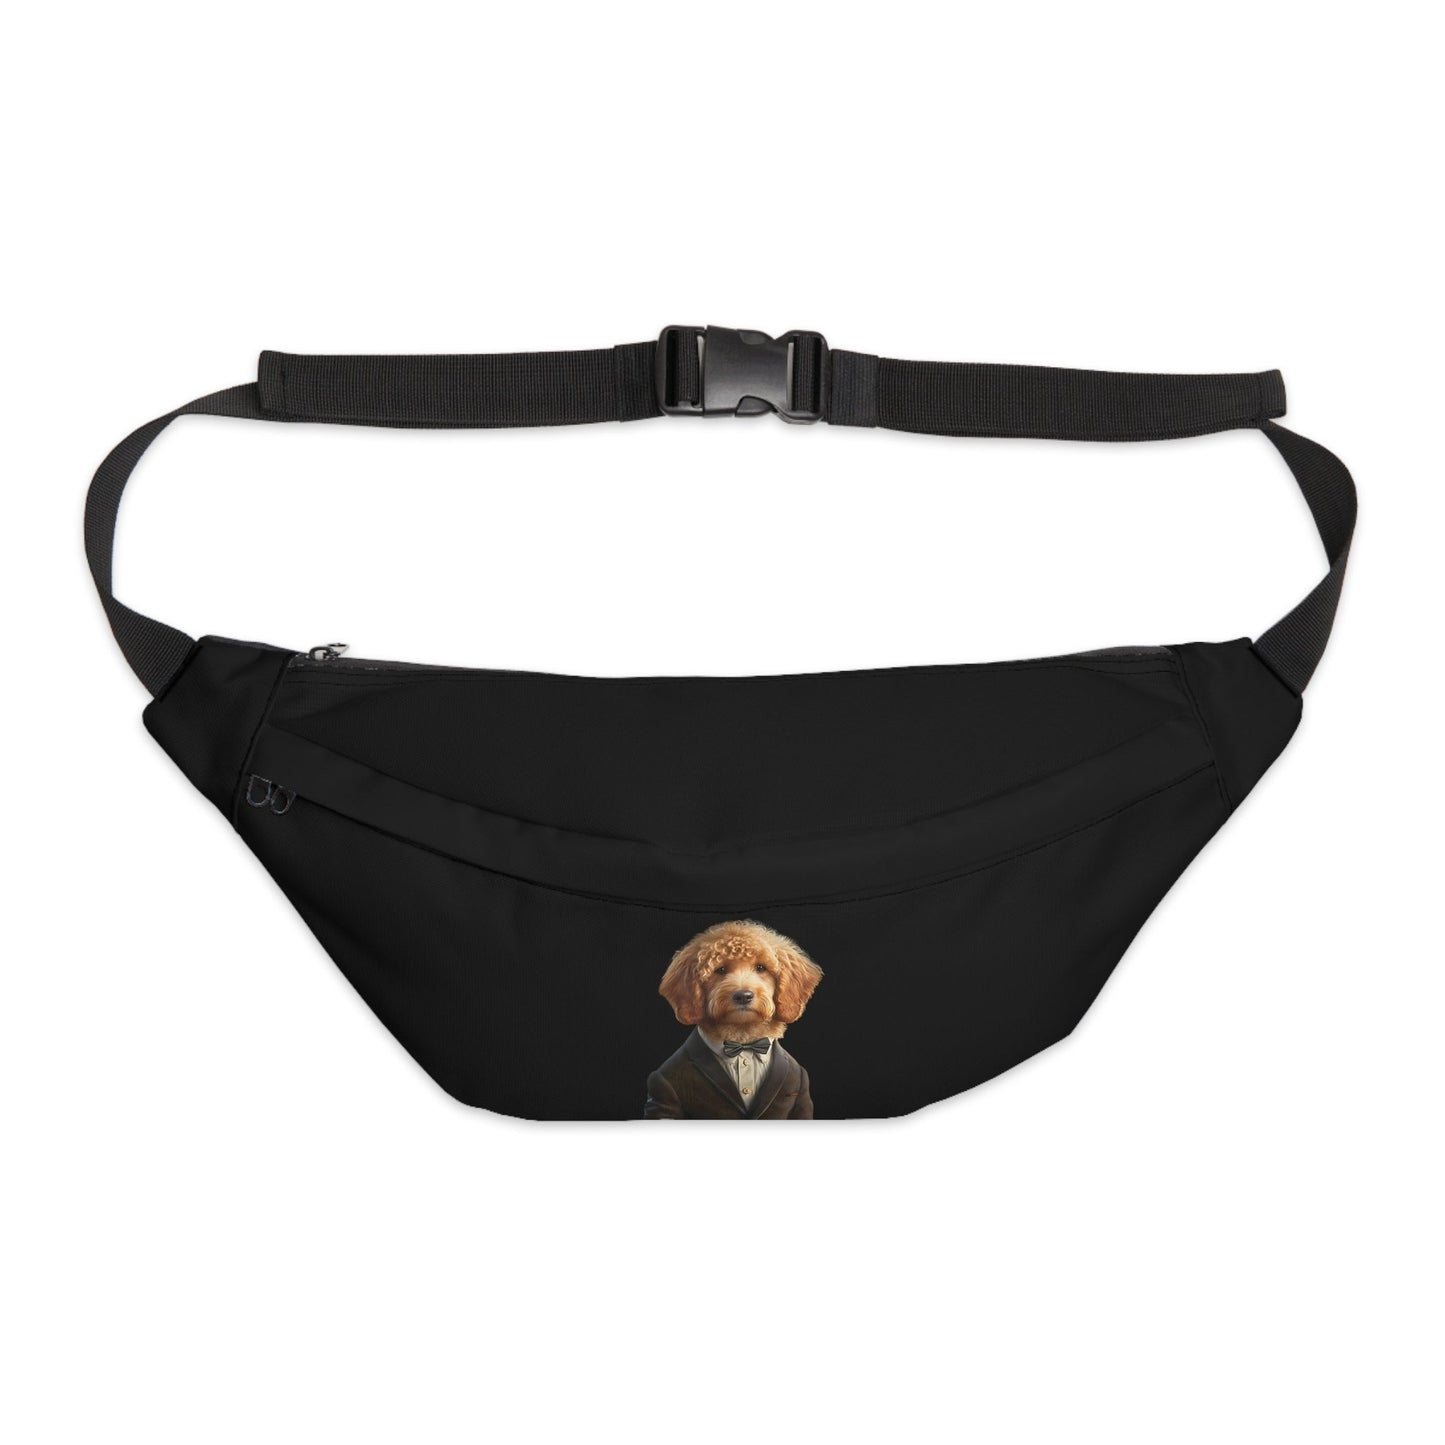 COOPER : Large Fanny Pack - Shaggy Chic